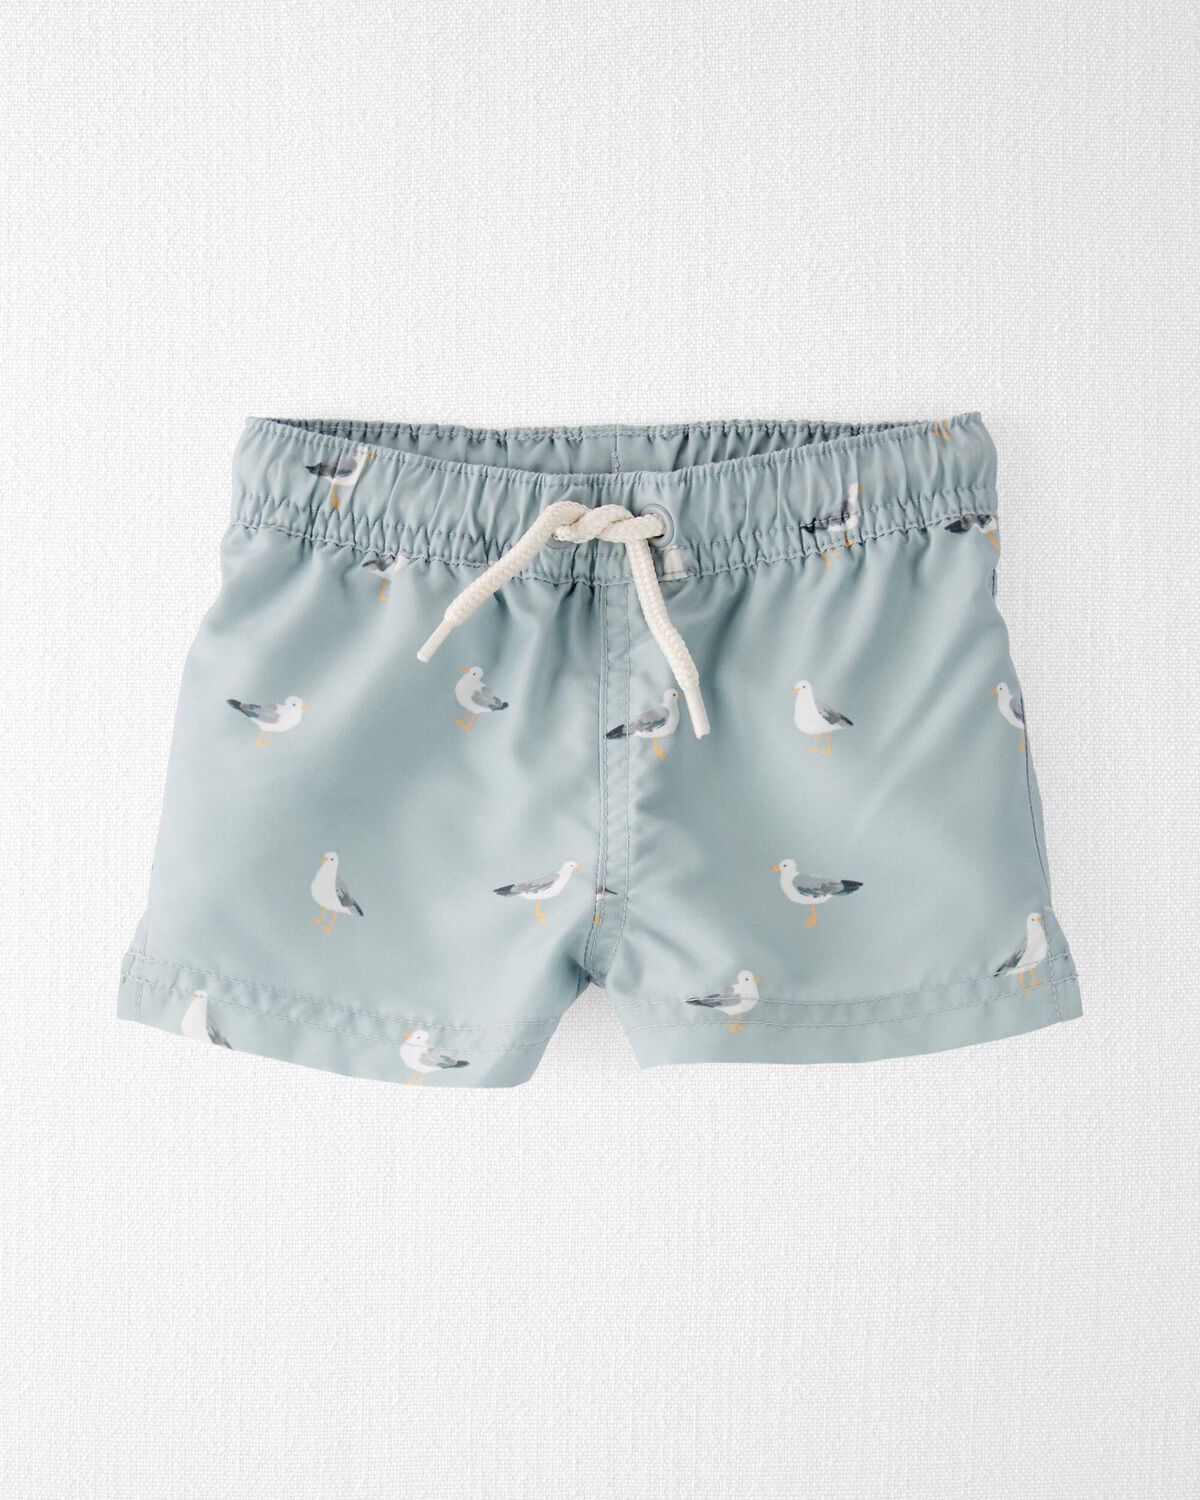 Seagull Print Baby Recycled Swim Trunks | carters.com | Carter's